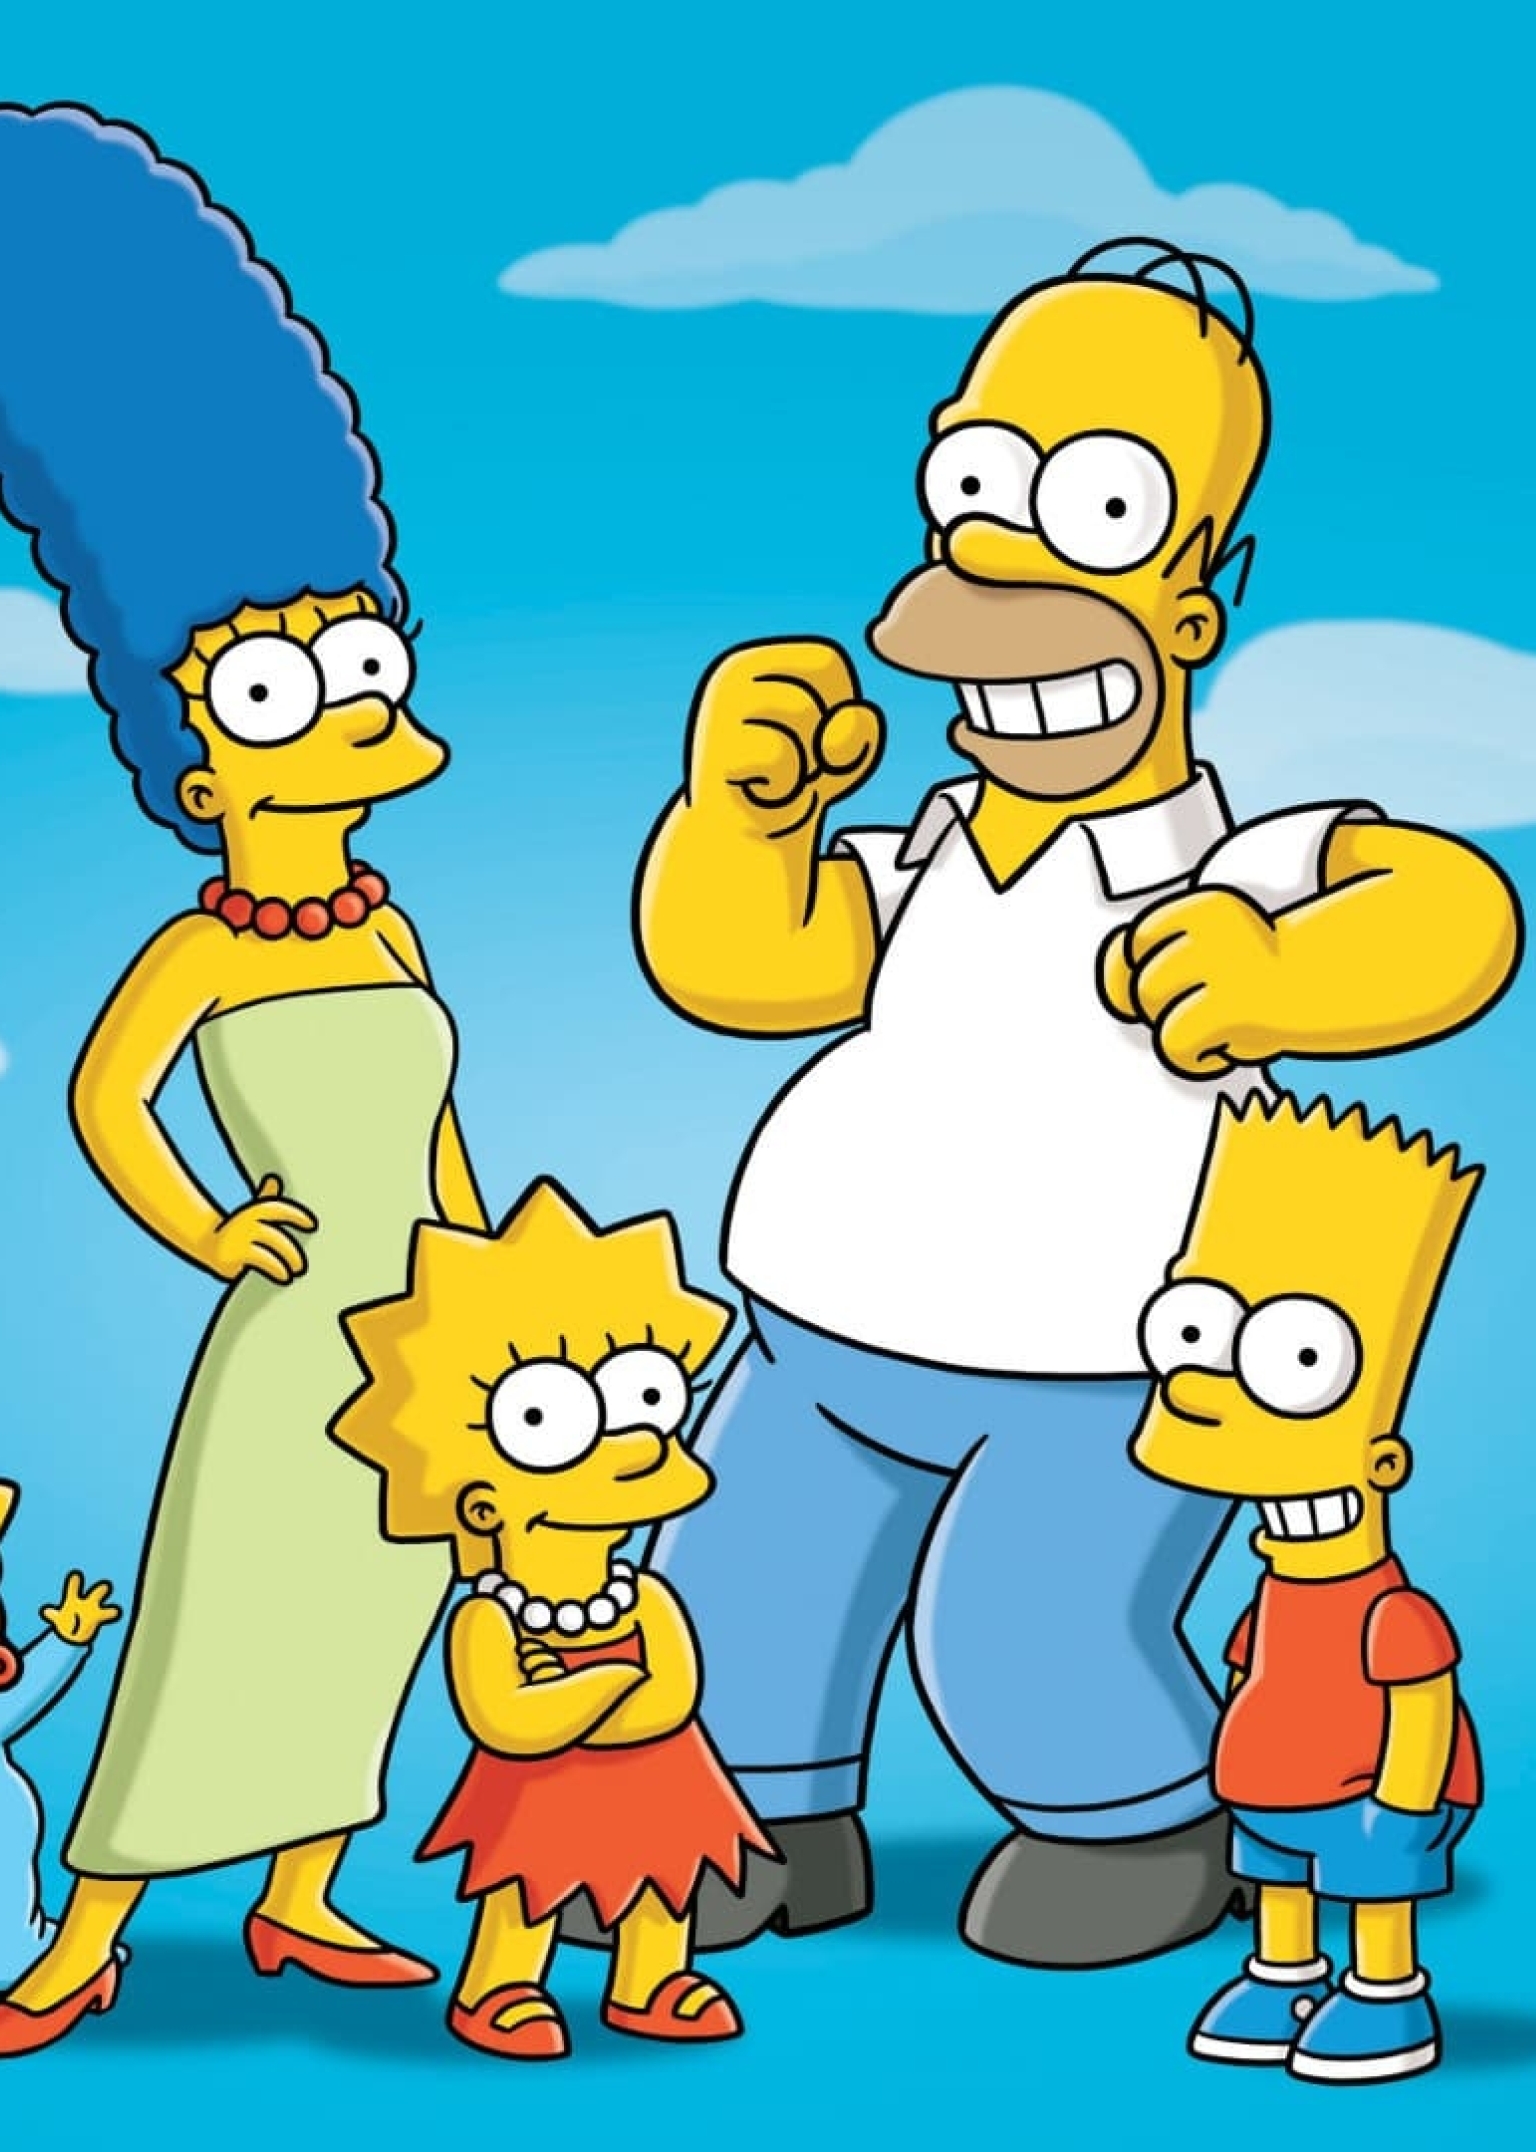 1536x2152 Simpsons Family 1536x2152 Resolution Wallpaper Hd Tv Series 4k Wallpapers Images Photos And Background Wallpapers Den